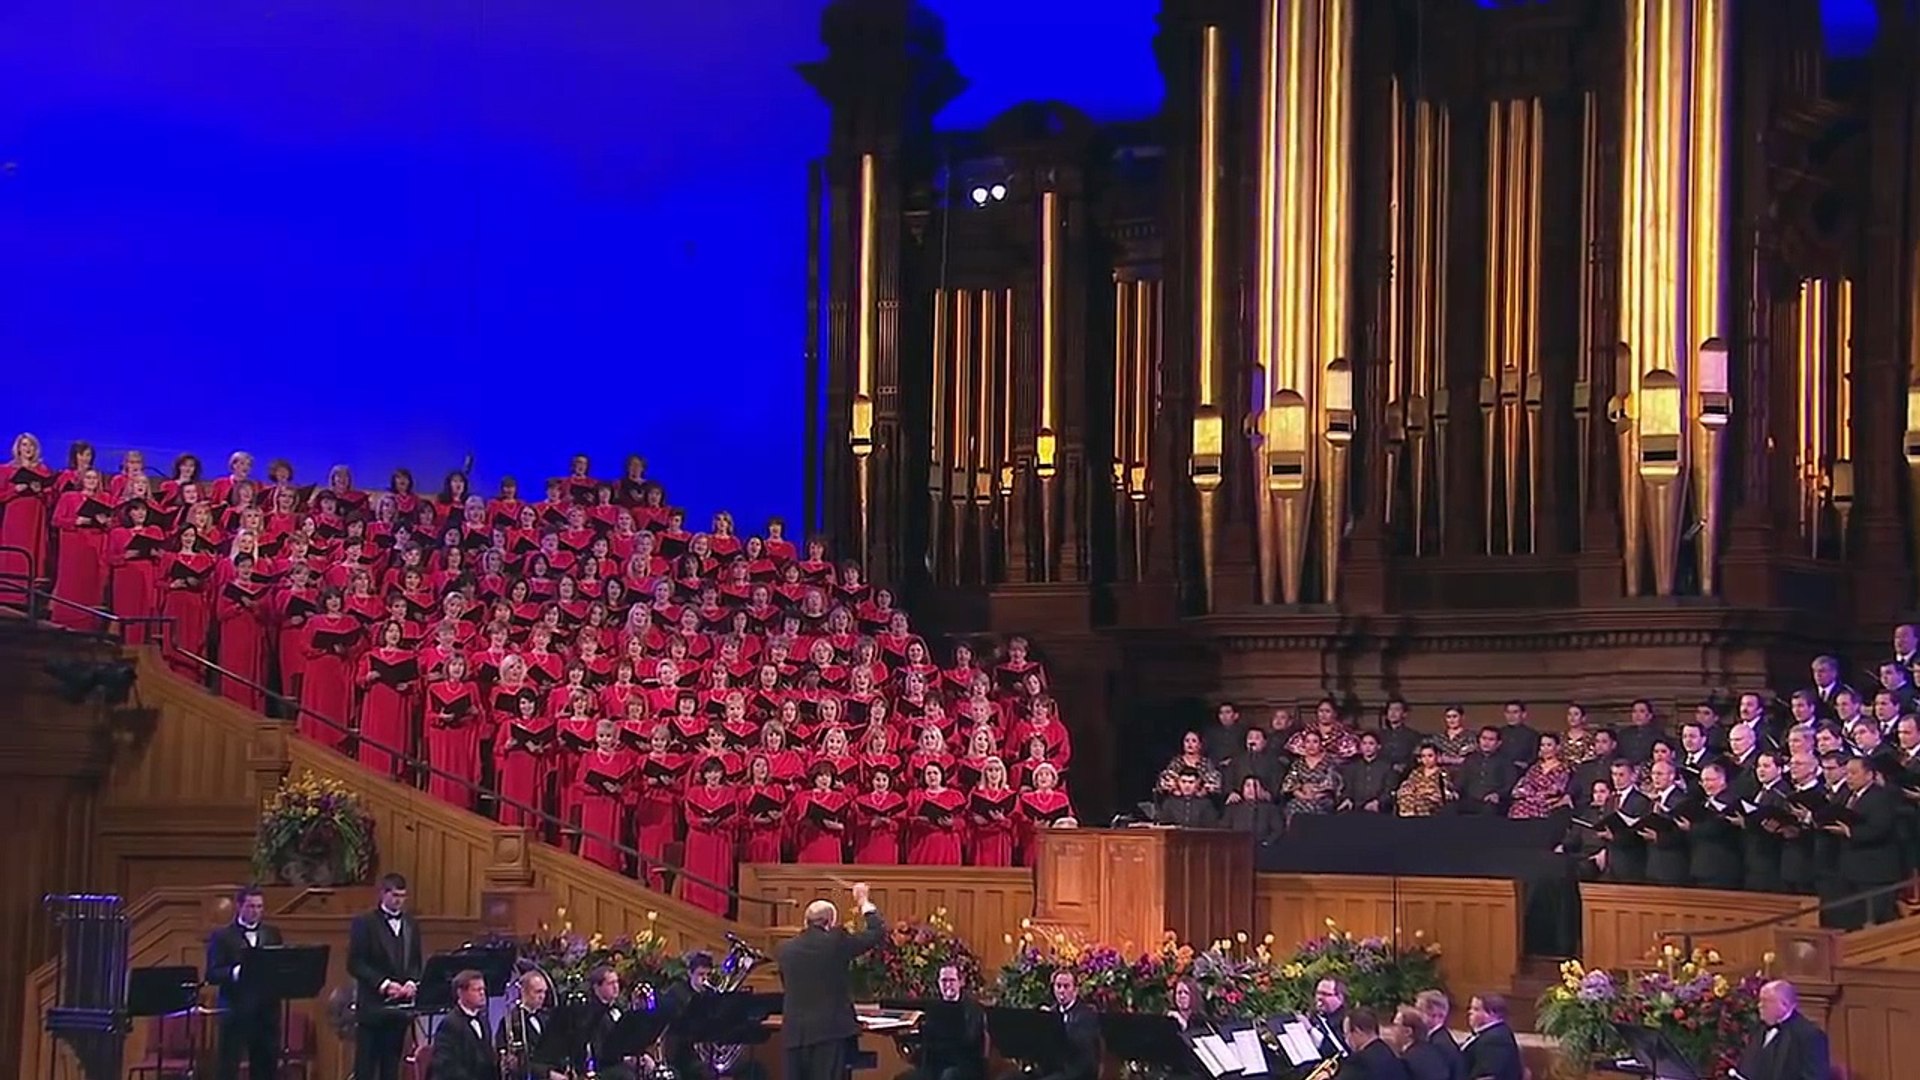 Madrigal Singers: First Filipino Artists to Perform with Mormon Tabernacle Choir